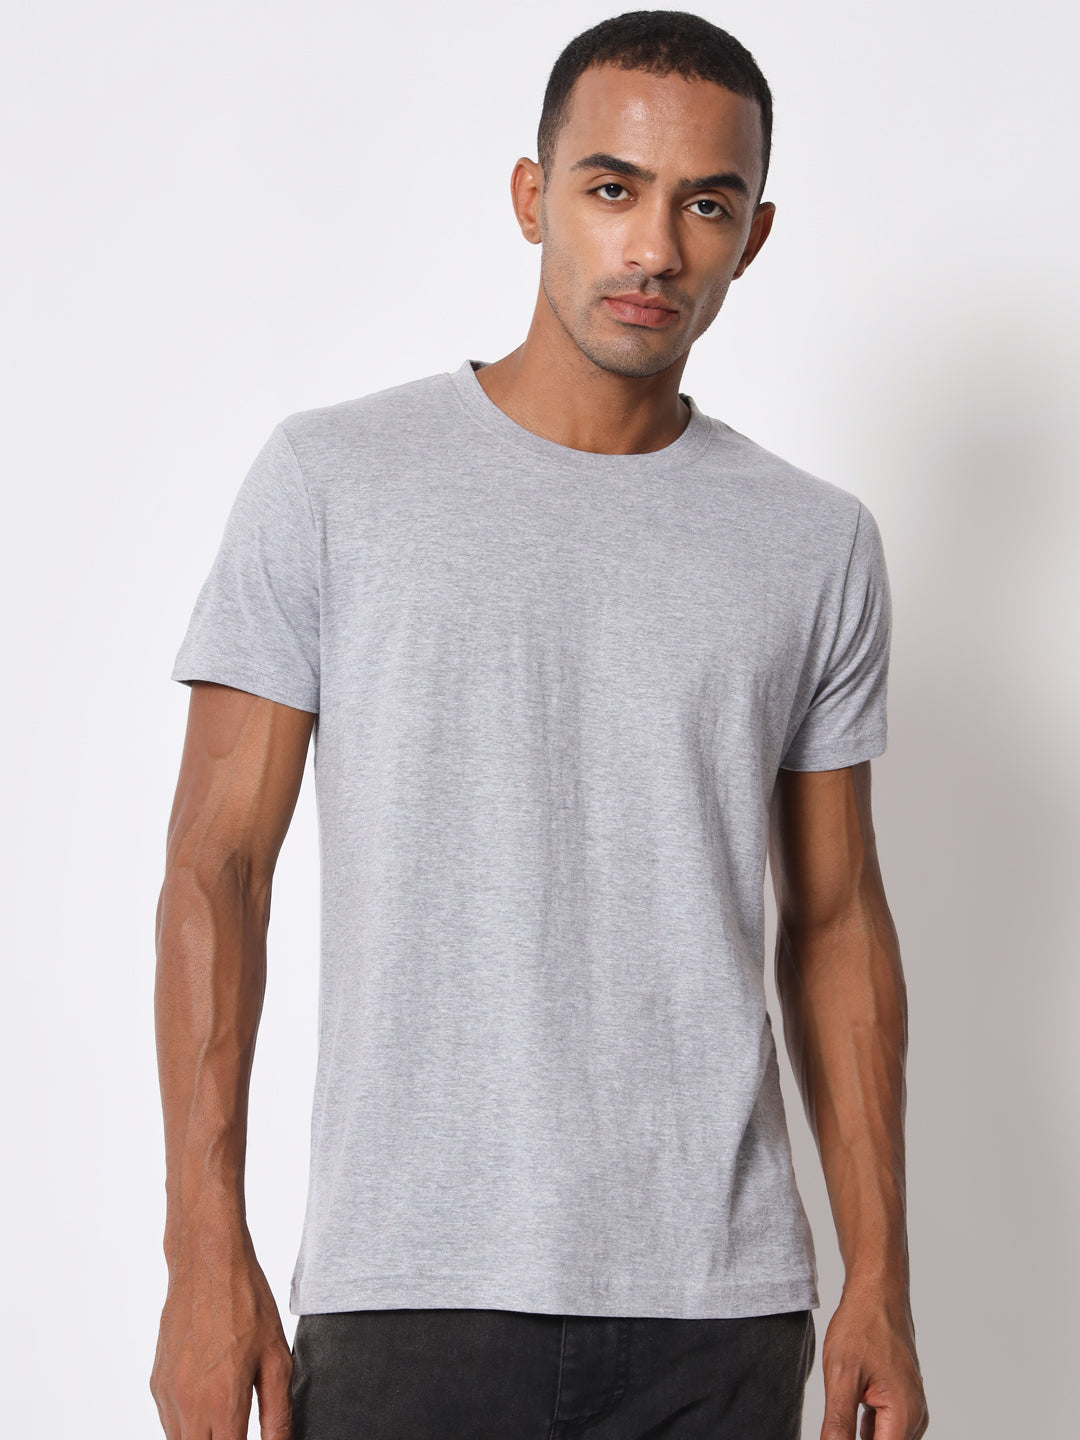 Grey Solid Half Sleeve Cotton T-shirt for Men